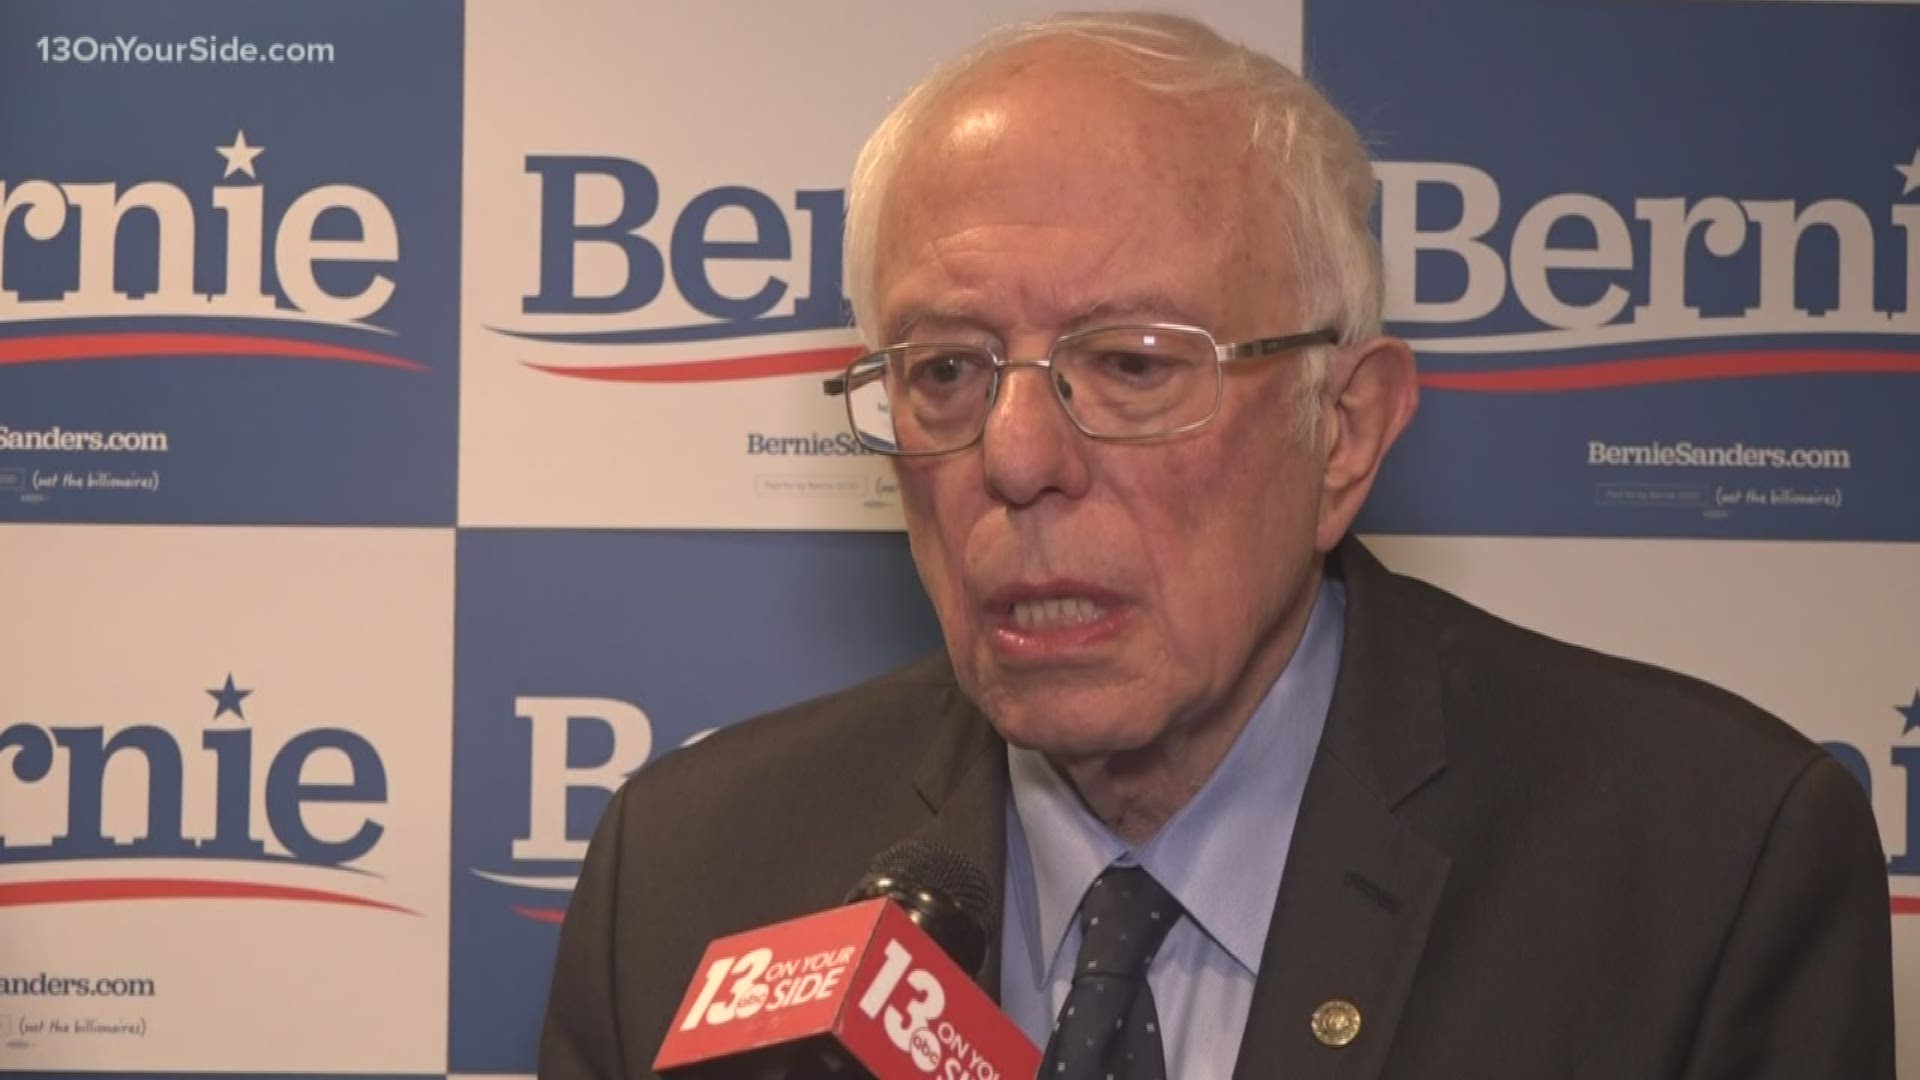 Sen. Bernie Sanders is hosting five Michigan events in the days leading up to the presidential Democratic primary on Tuesday, March 10.